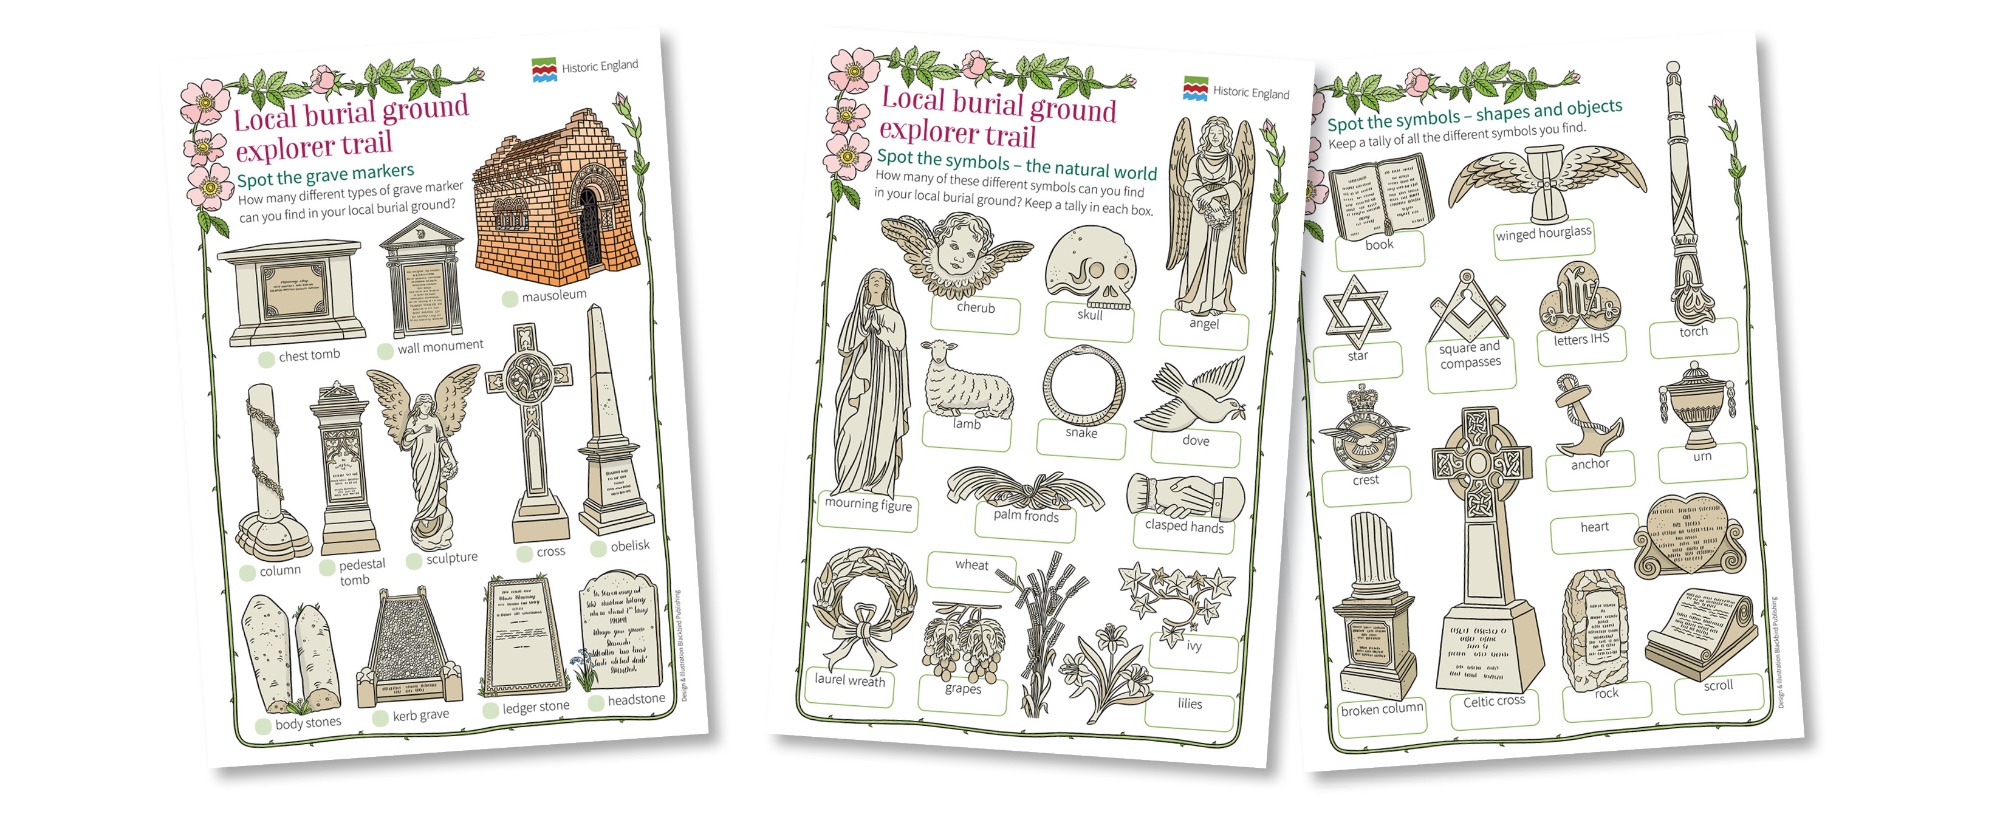 Blackbird Publishing schools spotting trail activity resource for Historic England exploring local history and burial grounds